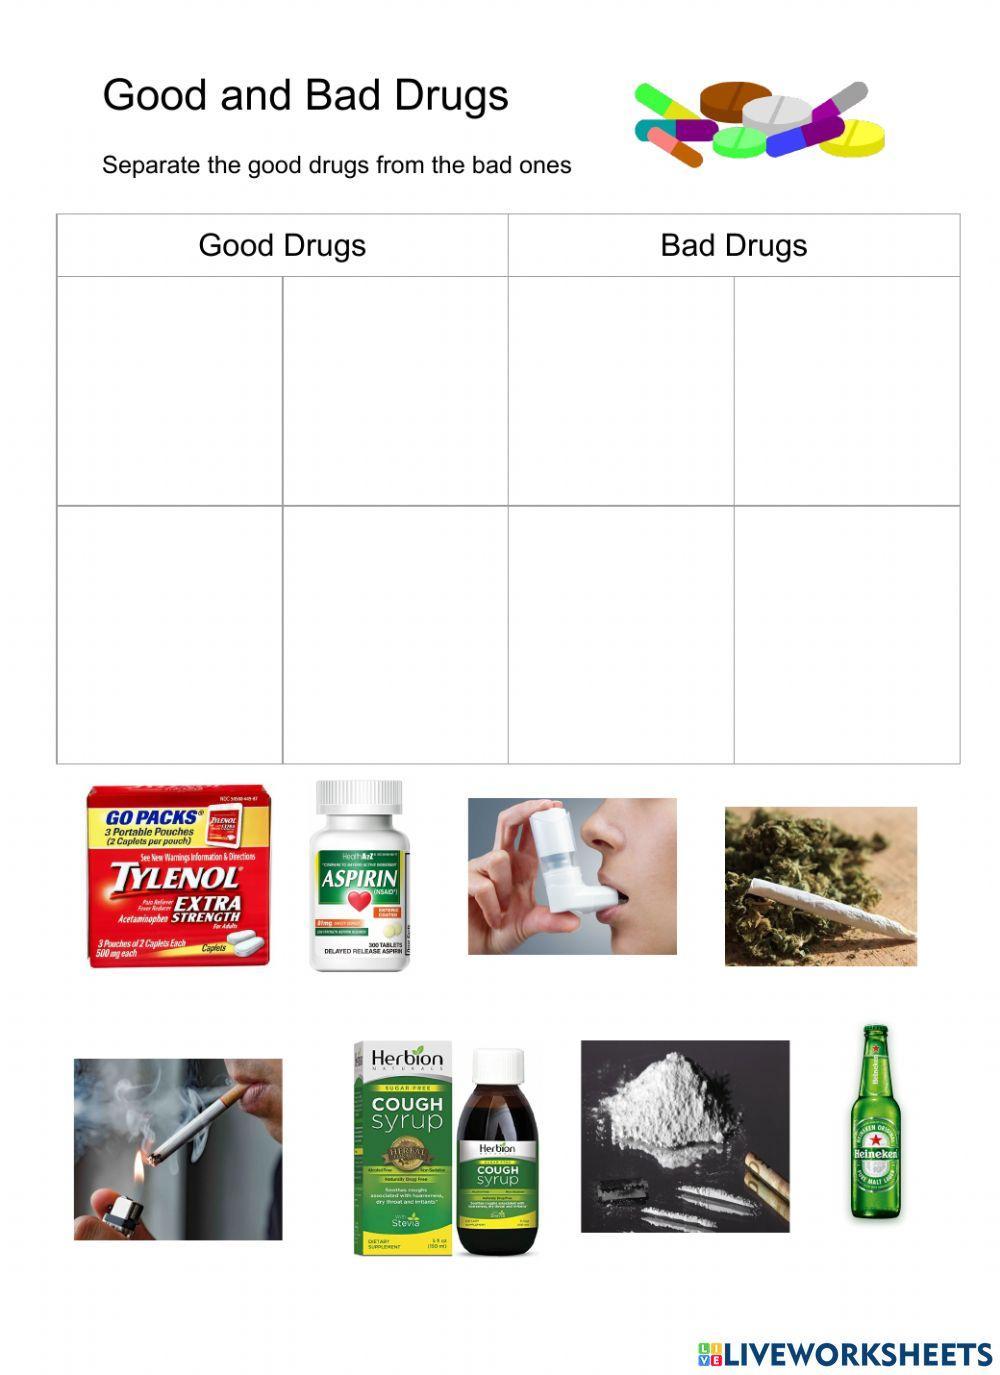 Good and Bad Drugs